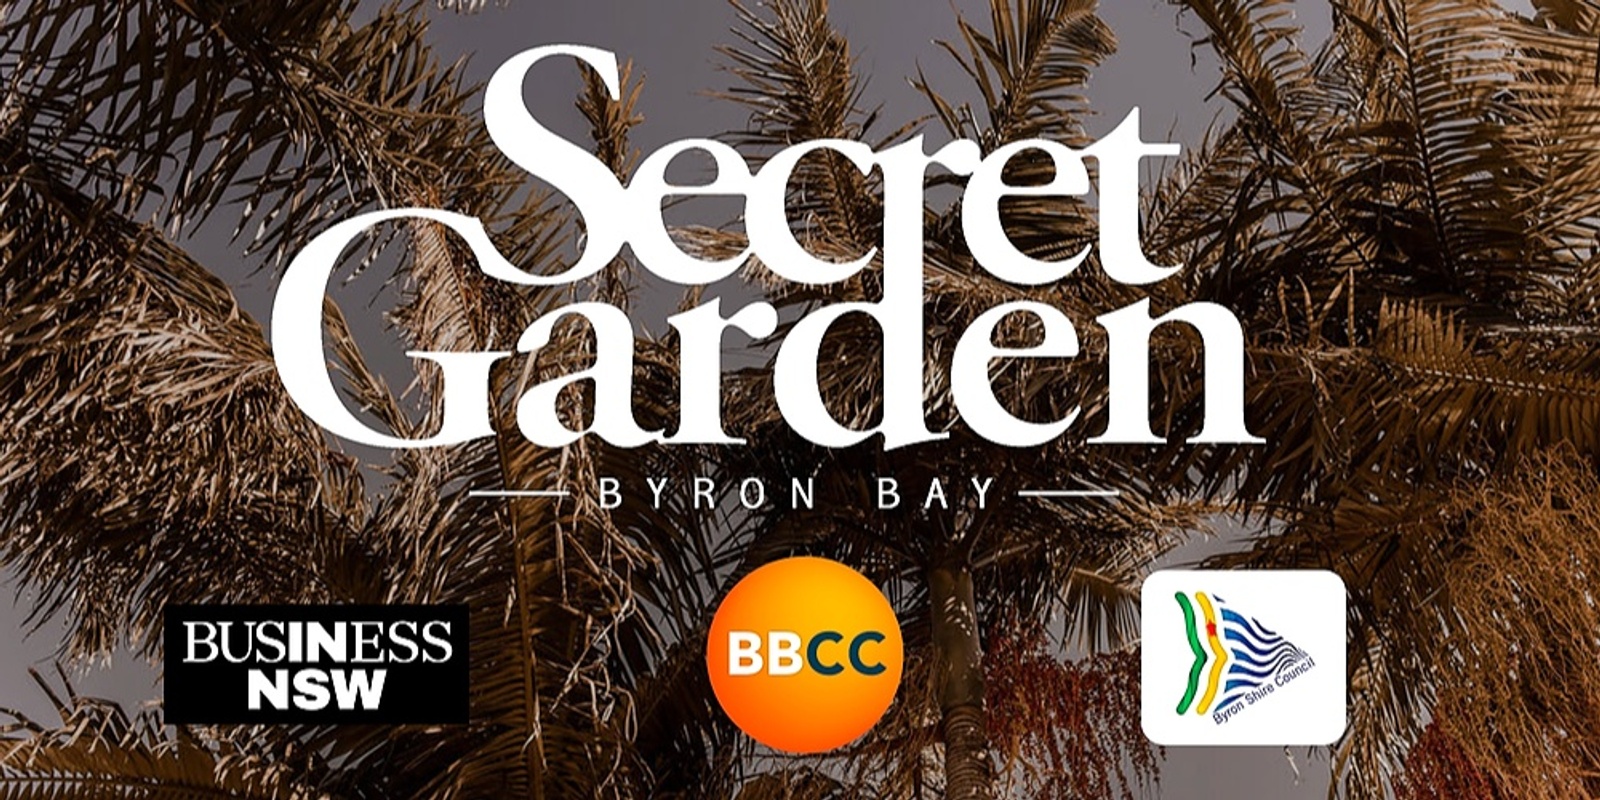 BBCC Business After Hours hosted by The Secret Garden